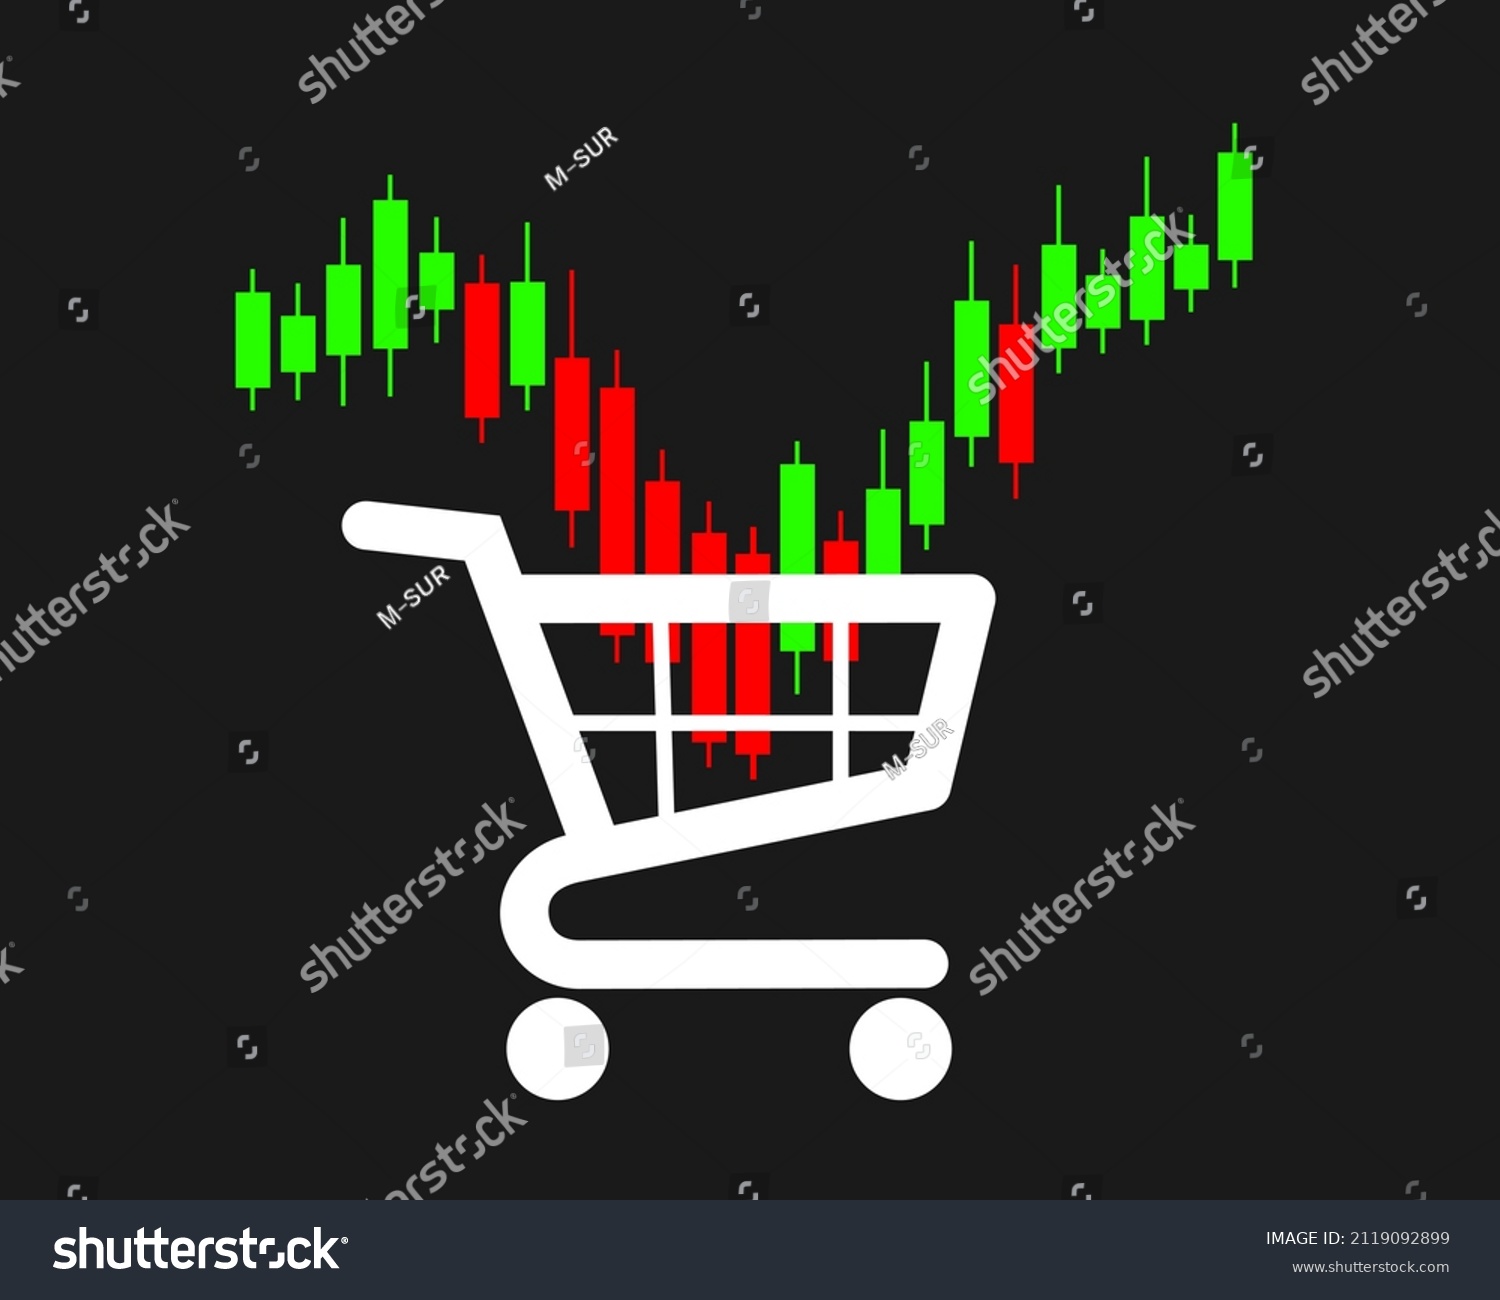 SVG of Buy the dip - investing and trading on stock market. Fluctuation of price and value. Shopping cart and candlestick chart. Vector illustration isolated on black.  svg